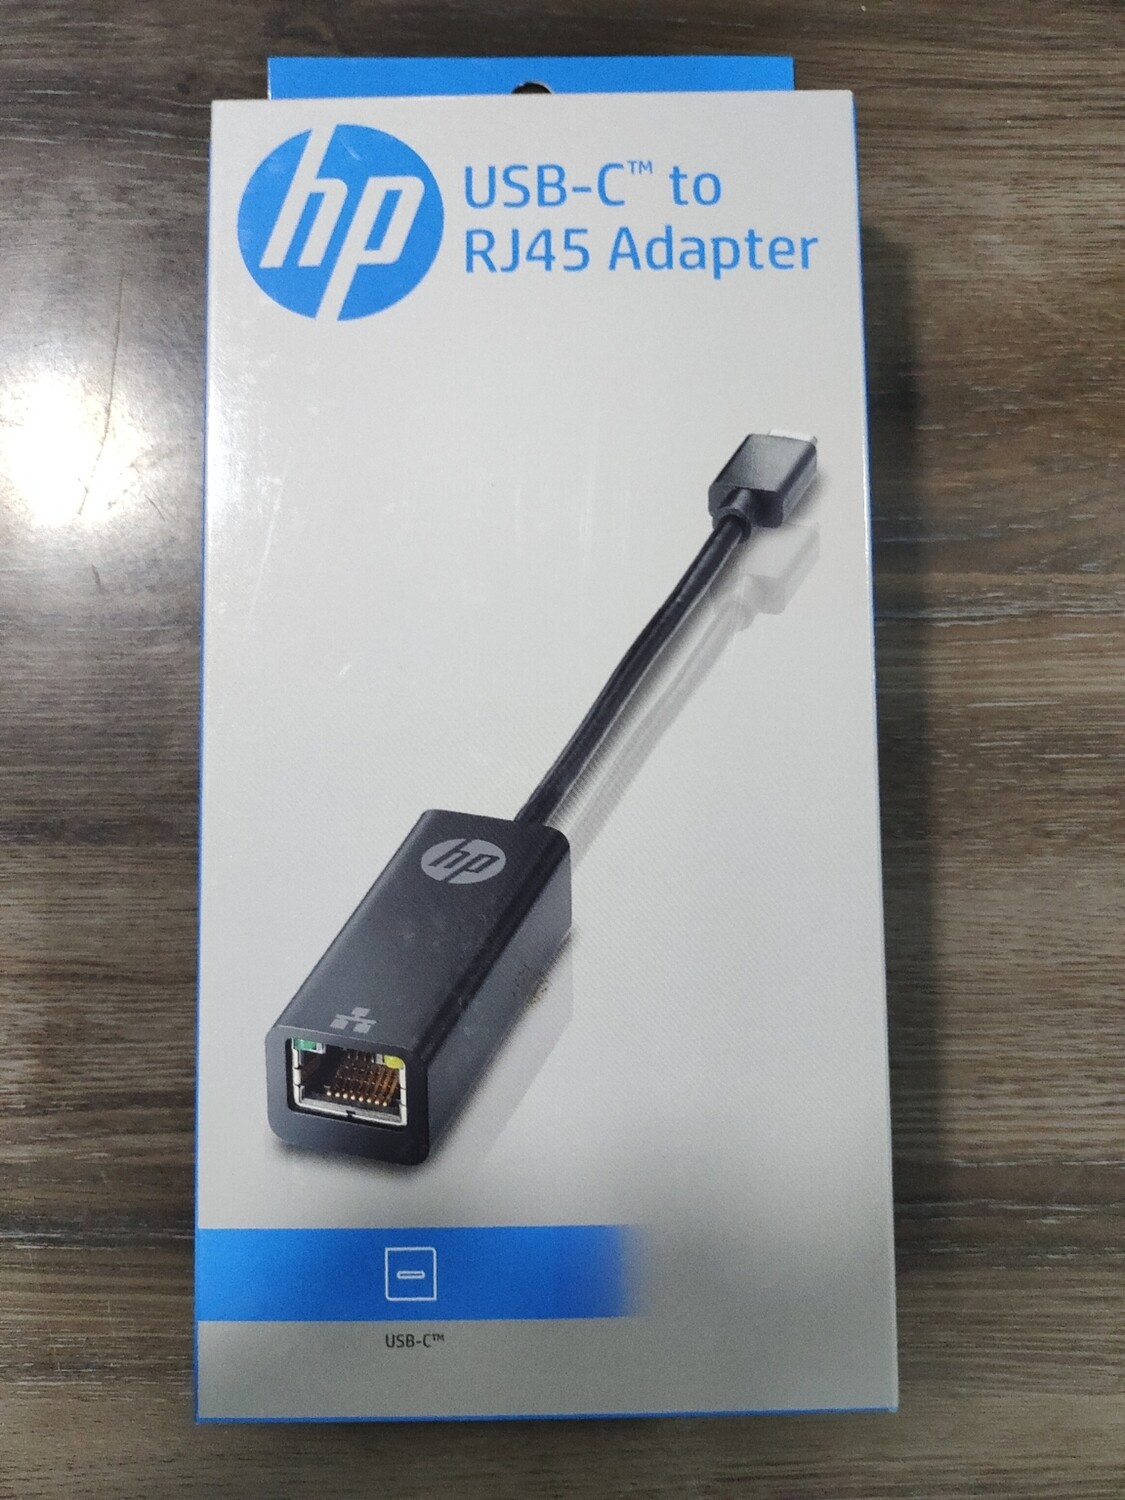 HP USB-C to RJ45 Adapter - Rs.1400